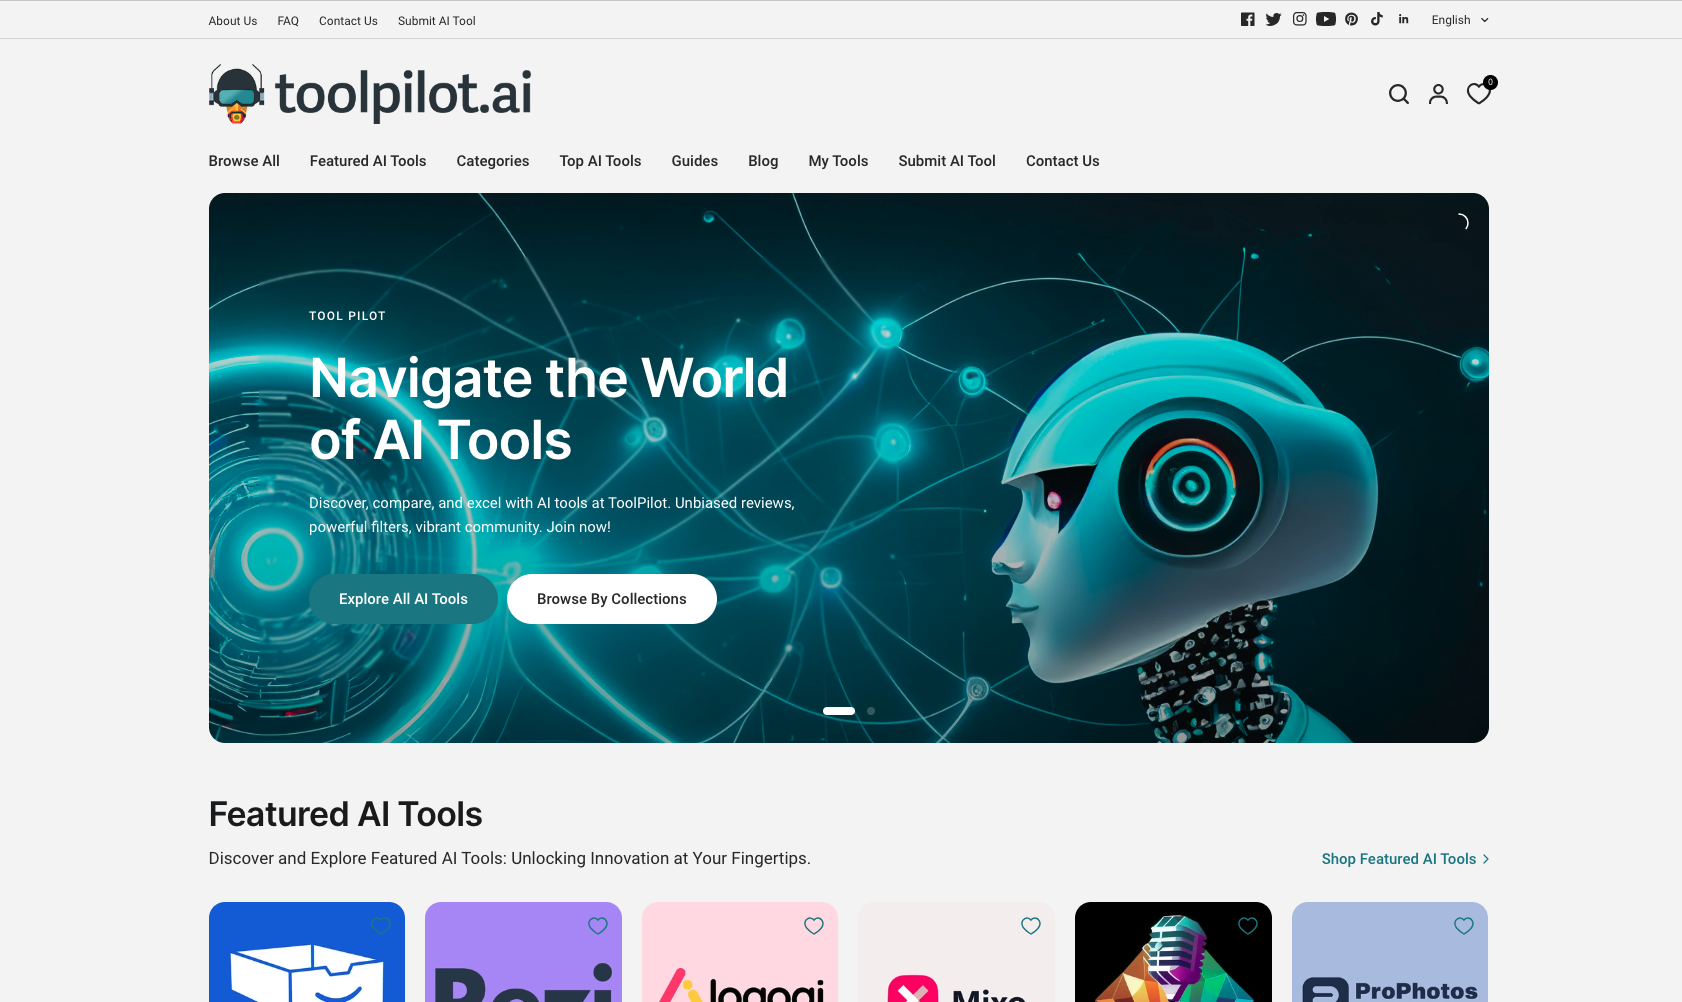 toolpilot.ai's user interface for search through a list of AI Tools